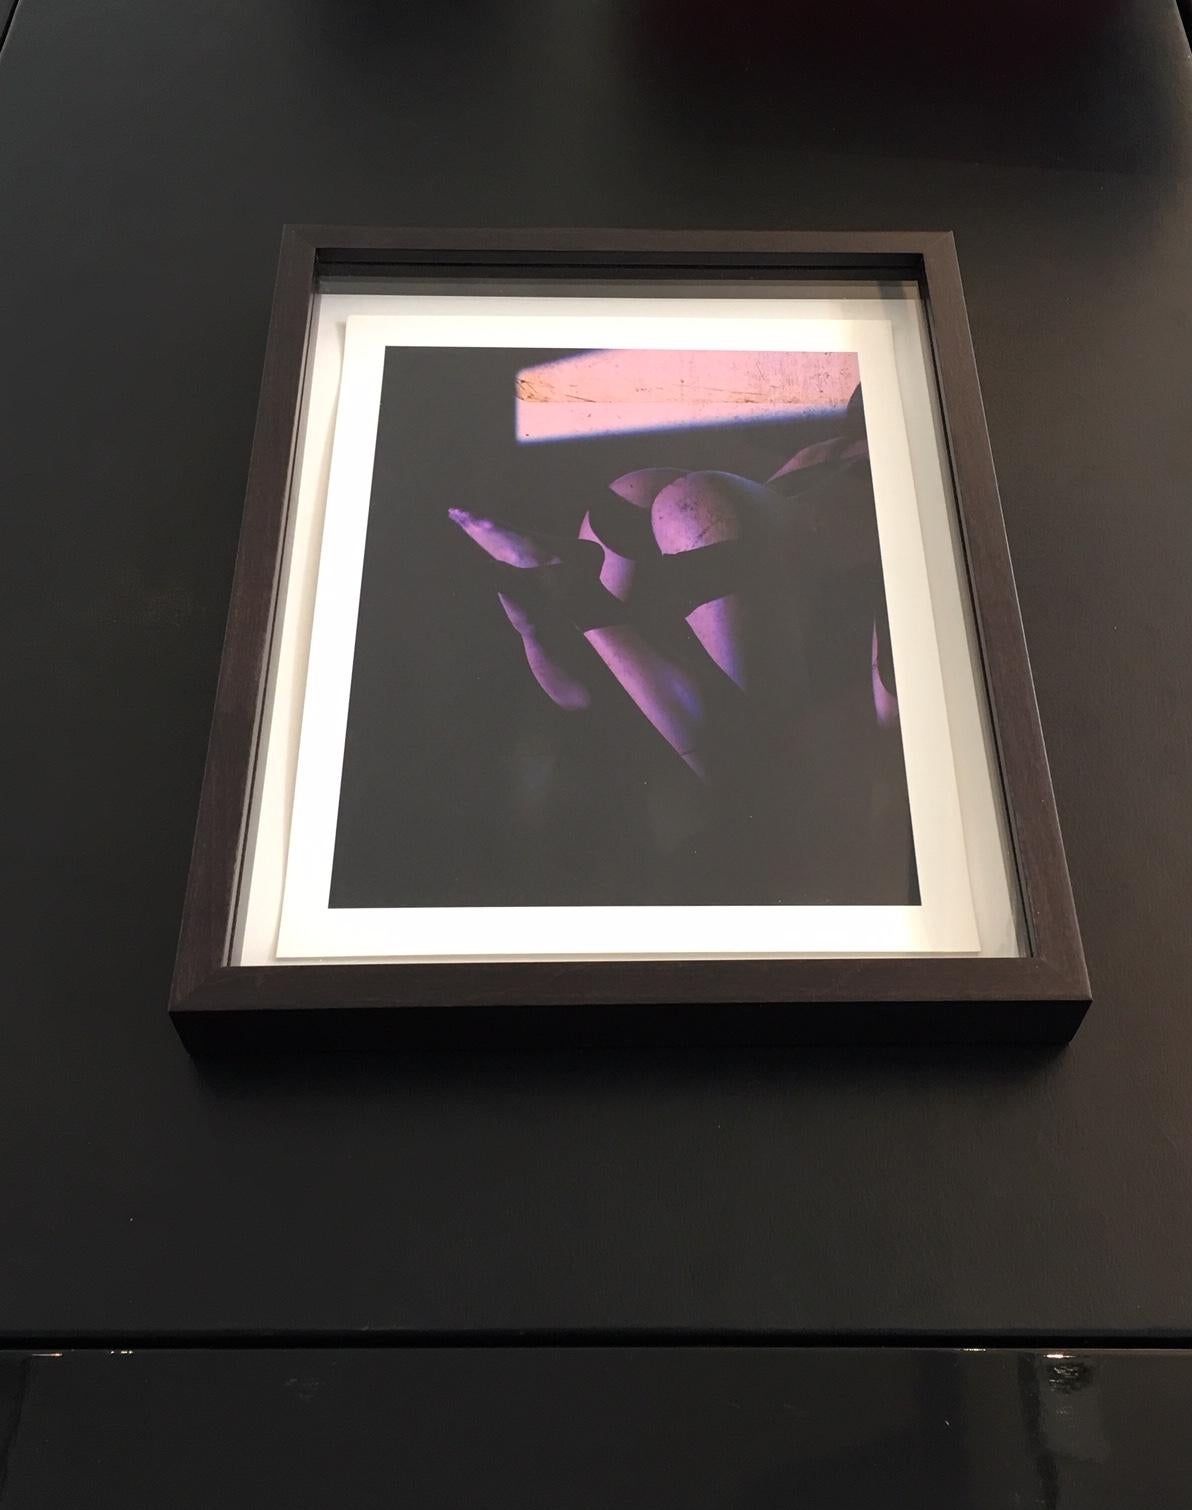 Erotic Nude -  artwork in violet shades - Photograph by Andreas H. Bitesnich